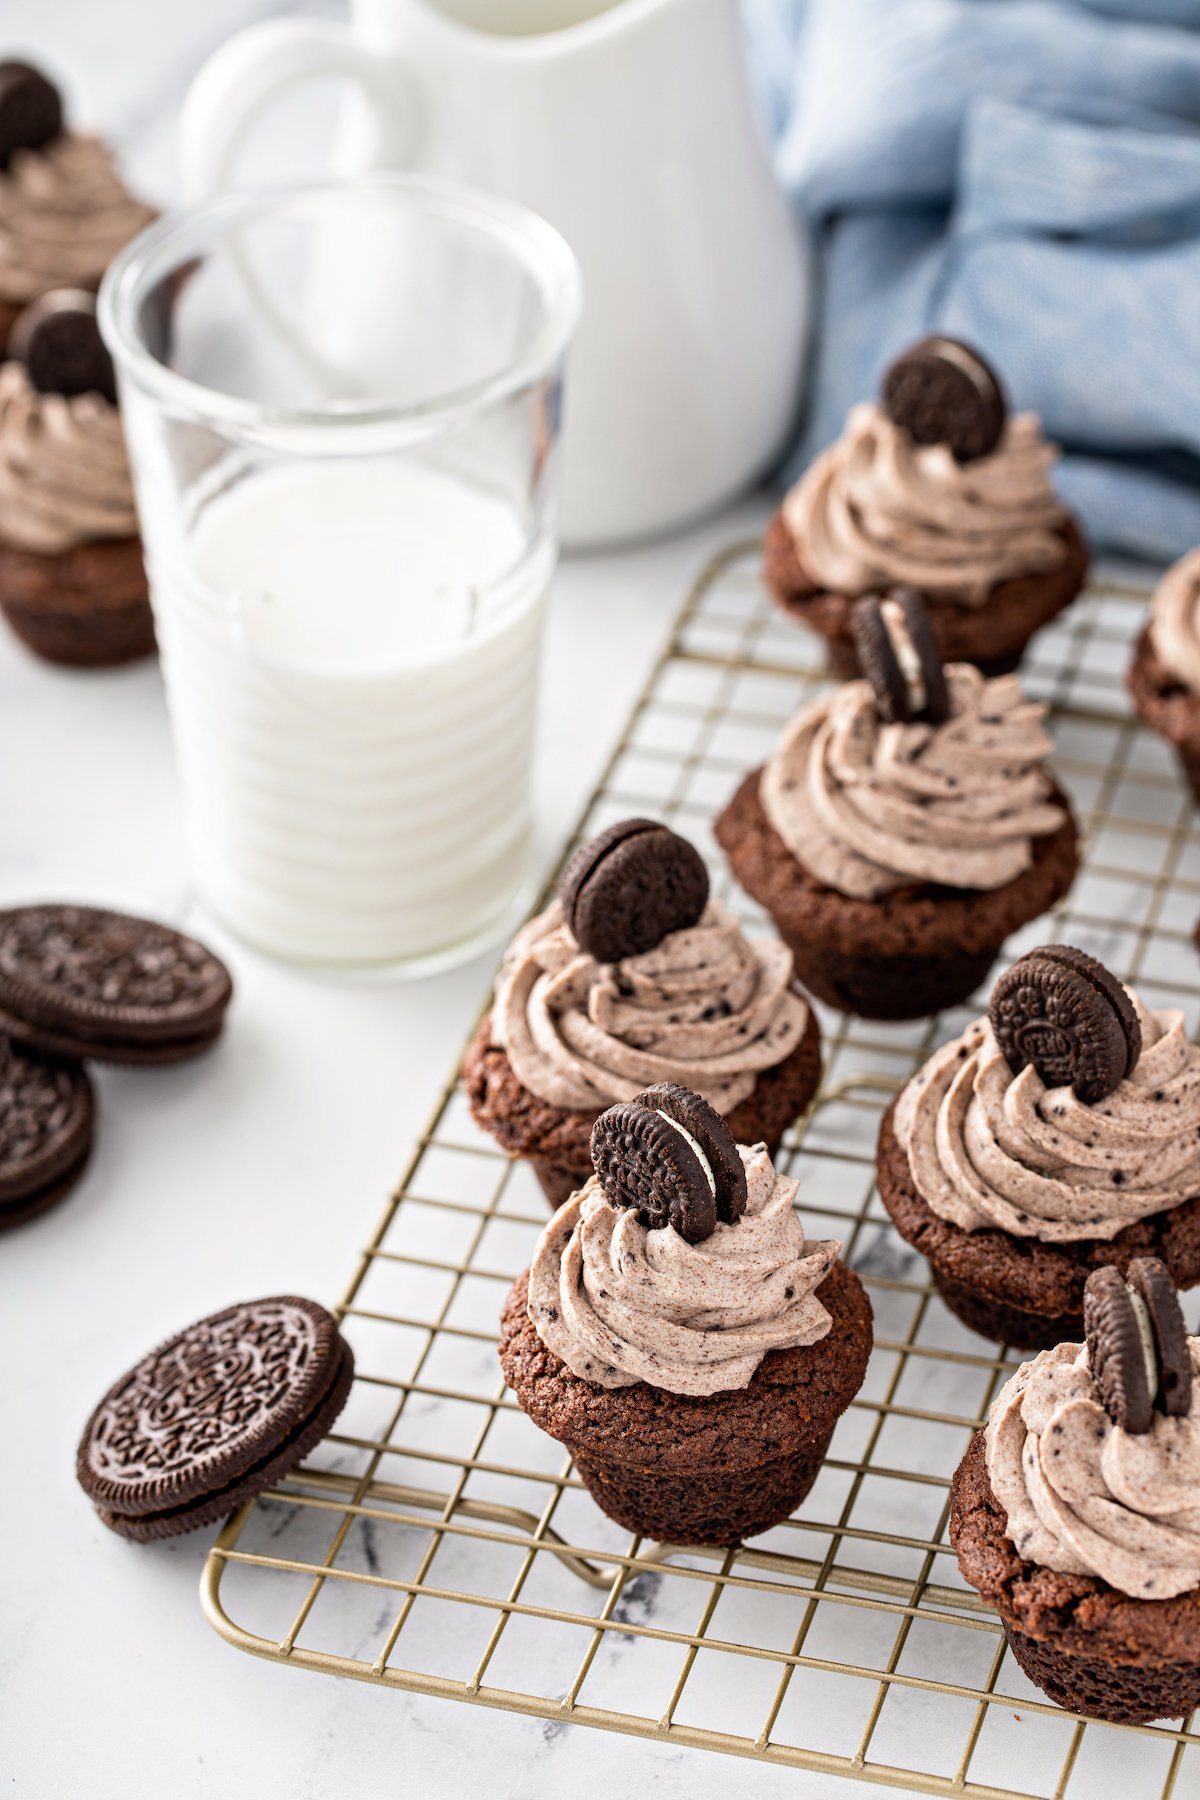 Oreo cheesecake desserts on a wire cooling rack next to a glass of milk.